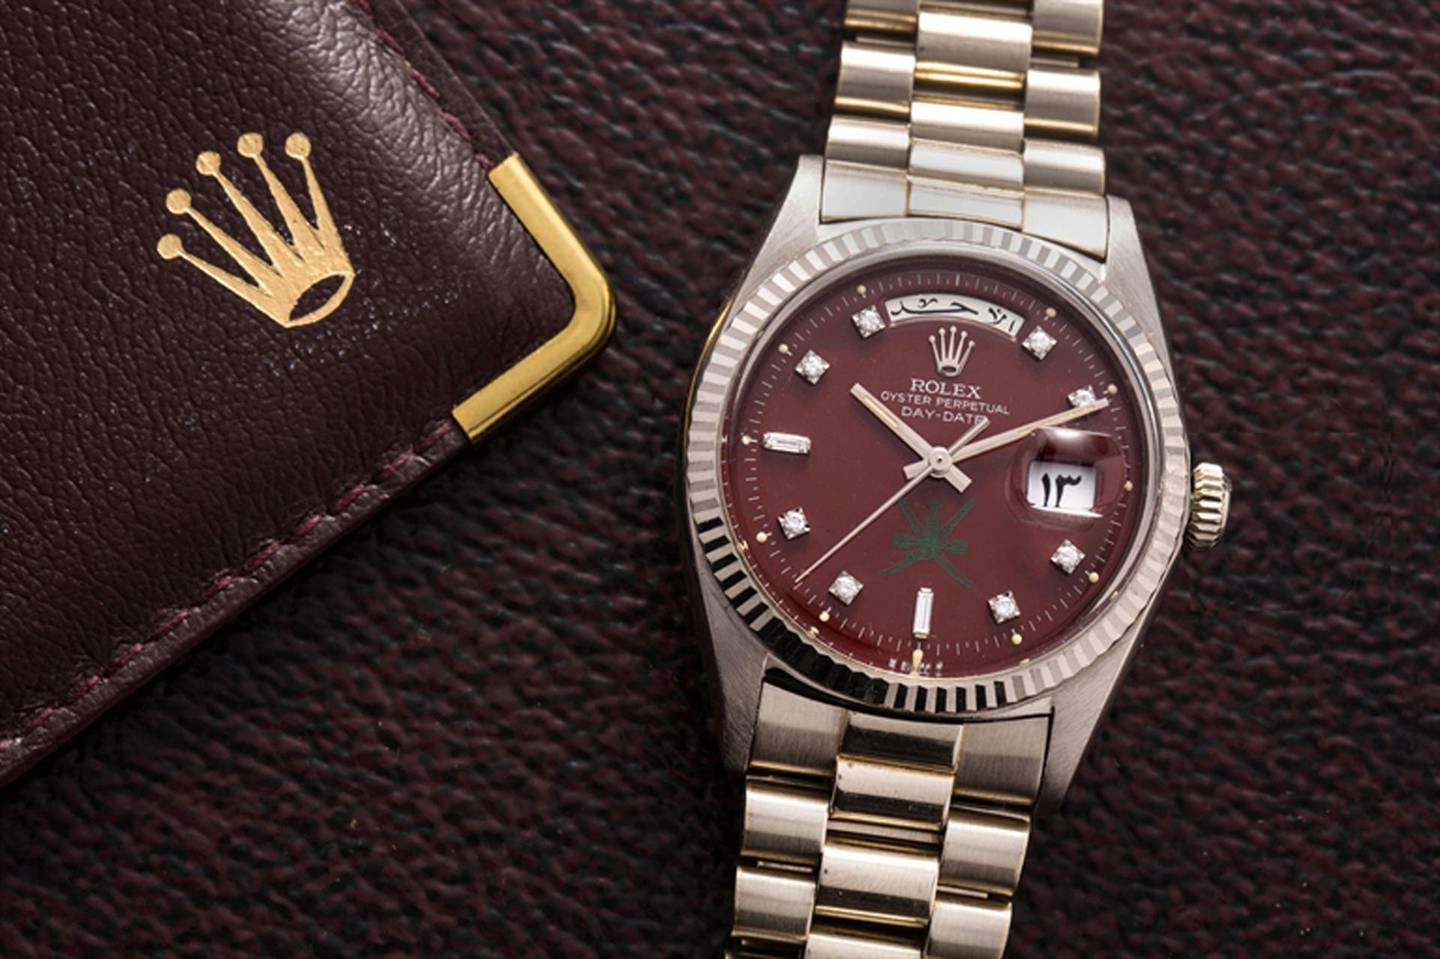 Custom made for the Sultanate of Oman, this white gold and diamond day-date Rolex with oxblood dial sold for $81,250. Christie's